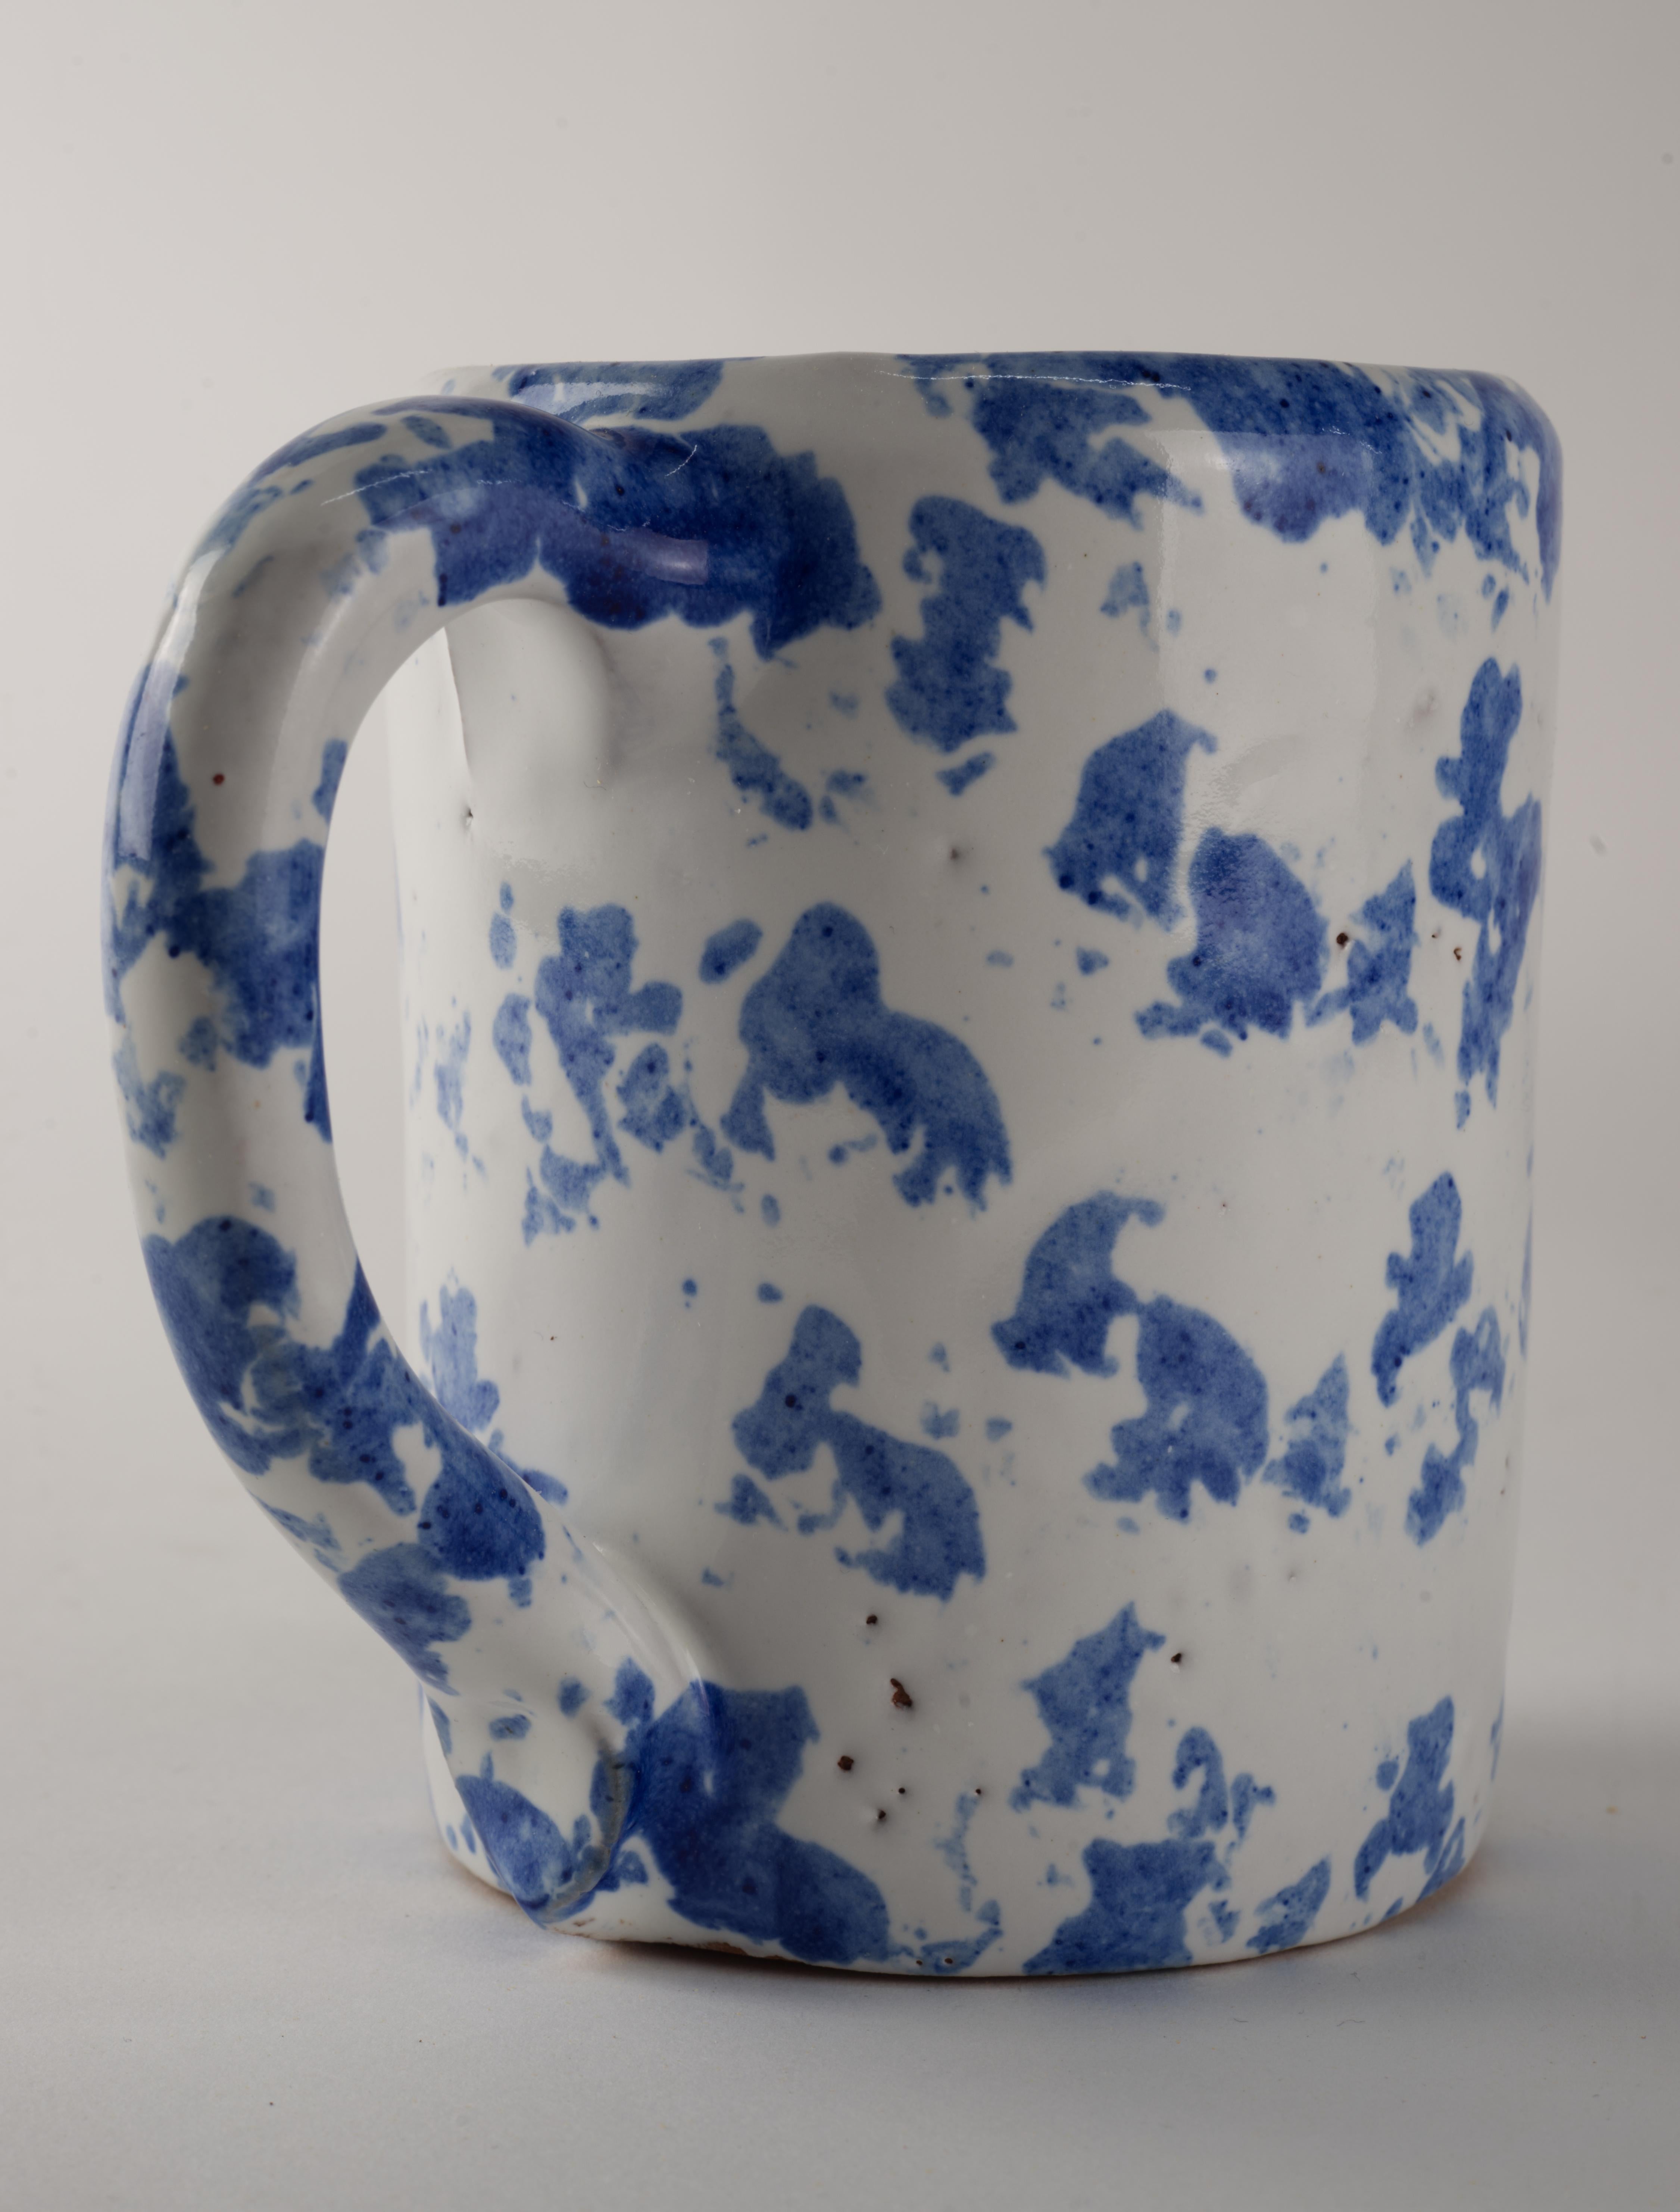  Rare large mug was handmade by Bybee Pottery and hand decorated in their trademark blue spongeware style.  

Bybee Pottery is an art pottery in Madison County, Kentucky USA, that was operated by various members of Cornelison family from 1809 to